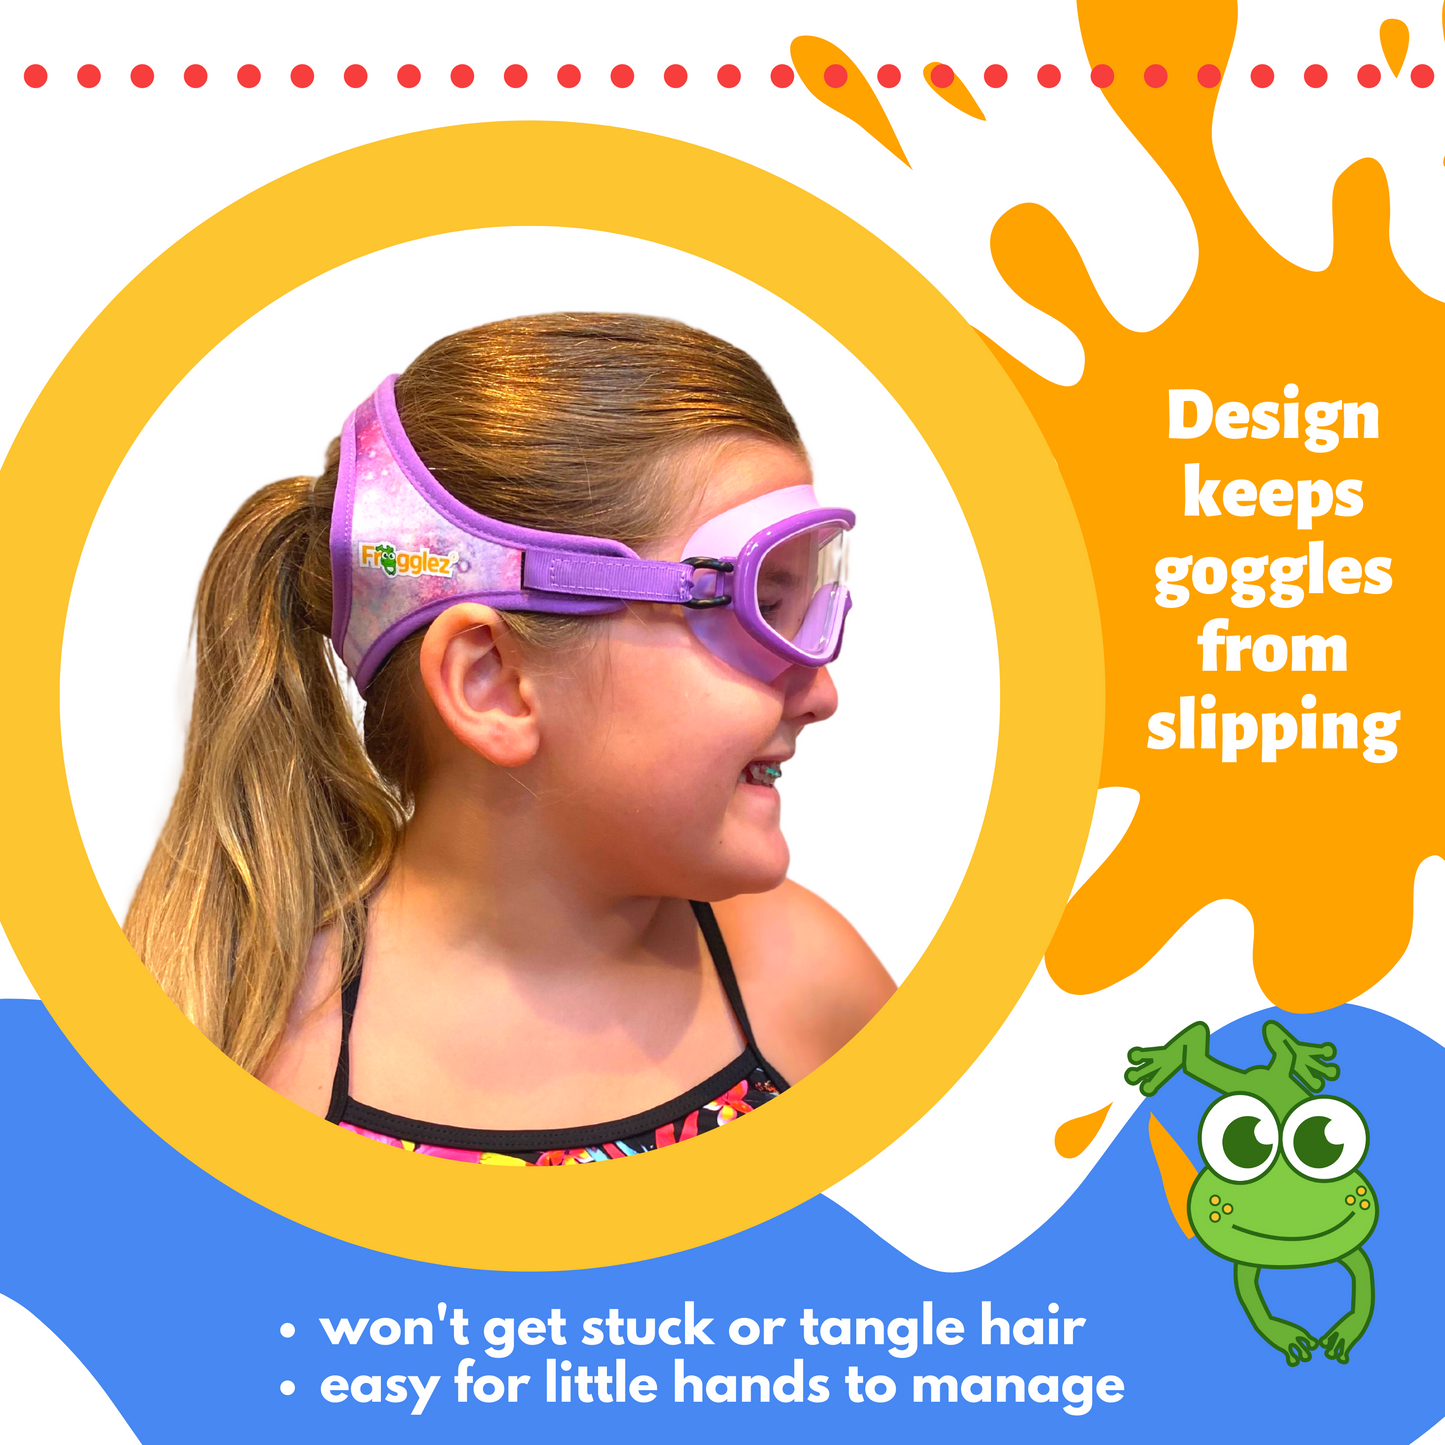 young girl pictured wearing frogglez goggles swimming mask. text reads design keeps goggles from slipping. won't get stuck or tangle hair. easy for little hands to manage.